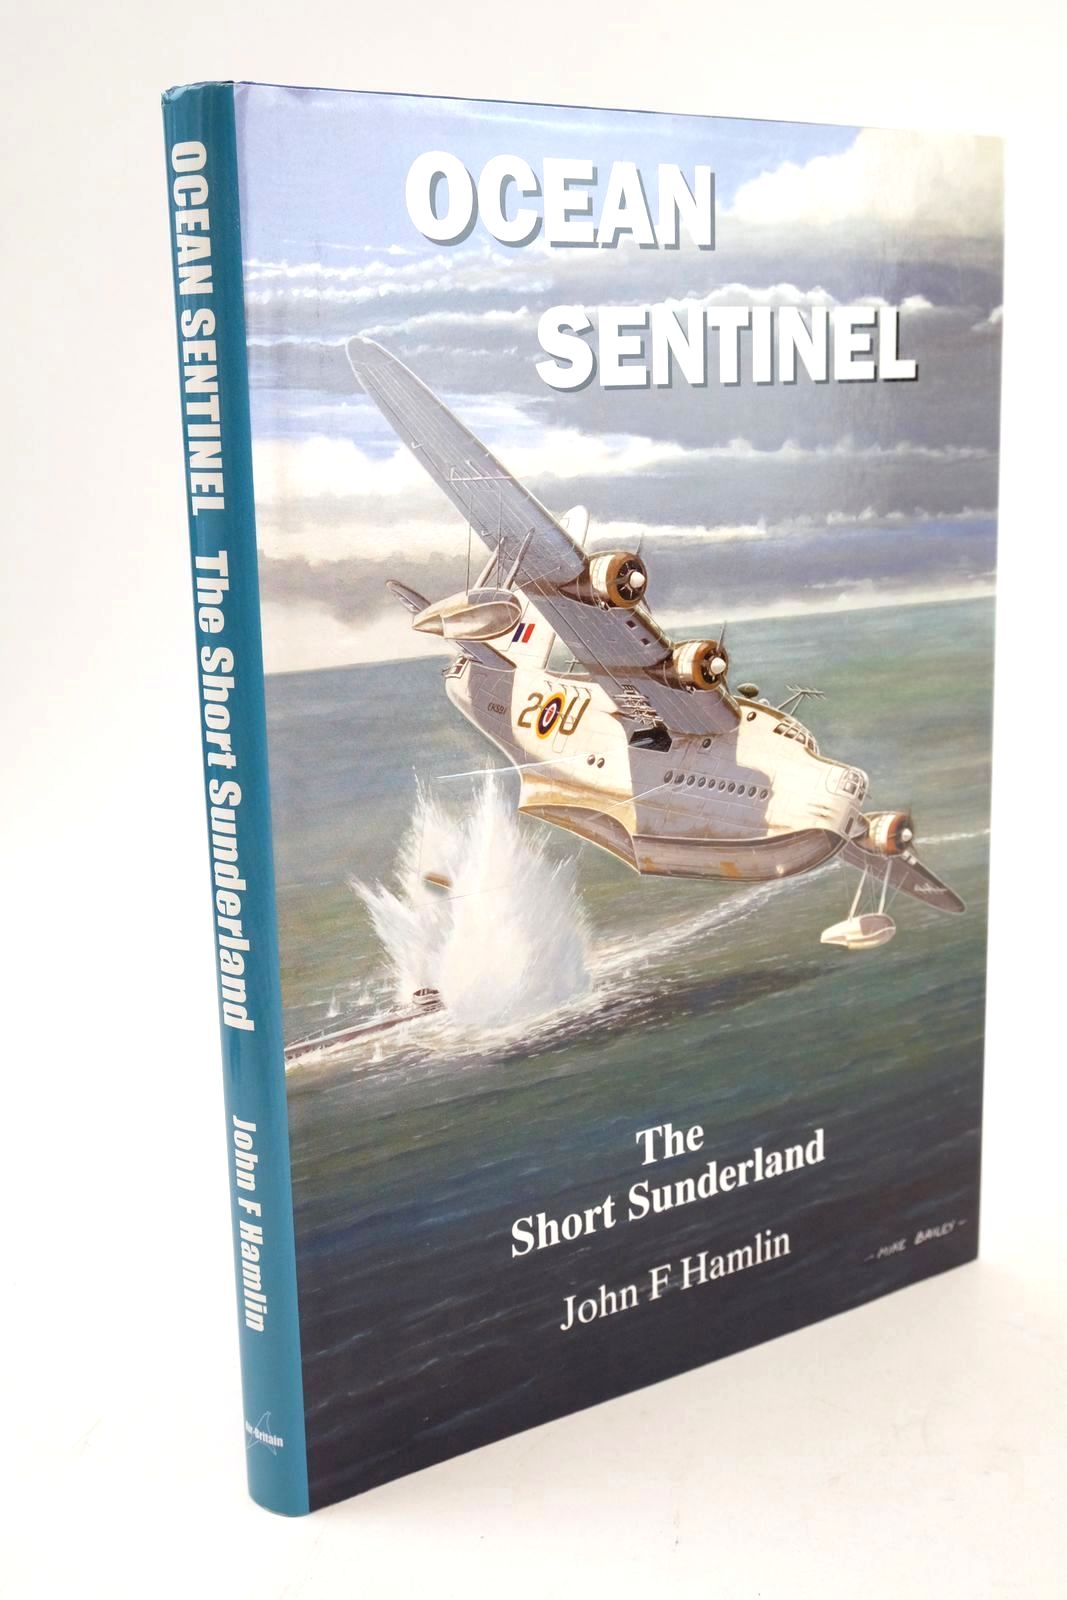 Photo of OCEAN SENTINEL: THE SHORT SUNDERLAND written by Hamlin, John F. published by Air-Britain (STOCK CODE: 1325199)  for sale by Stella & Rose's Books